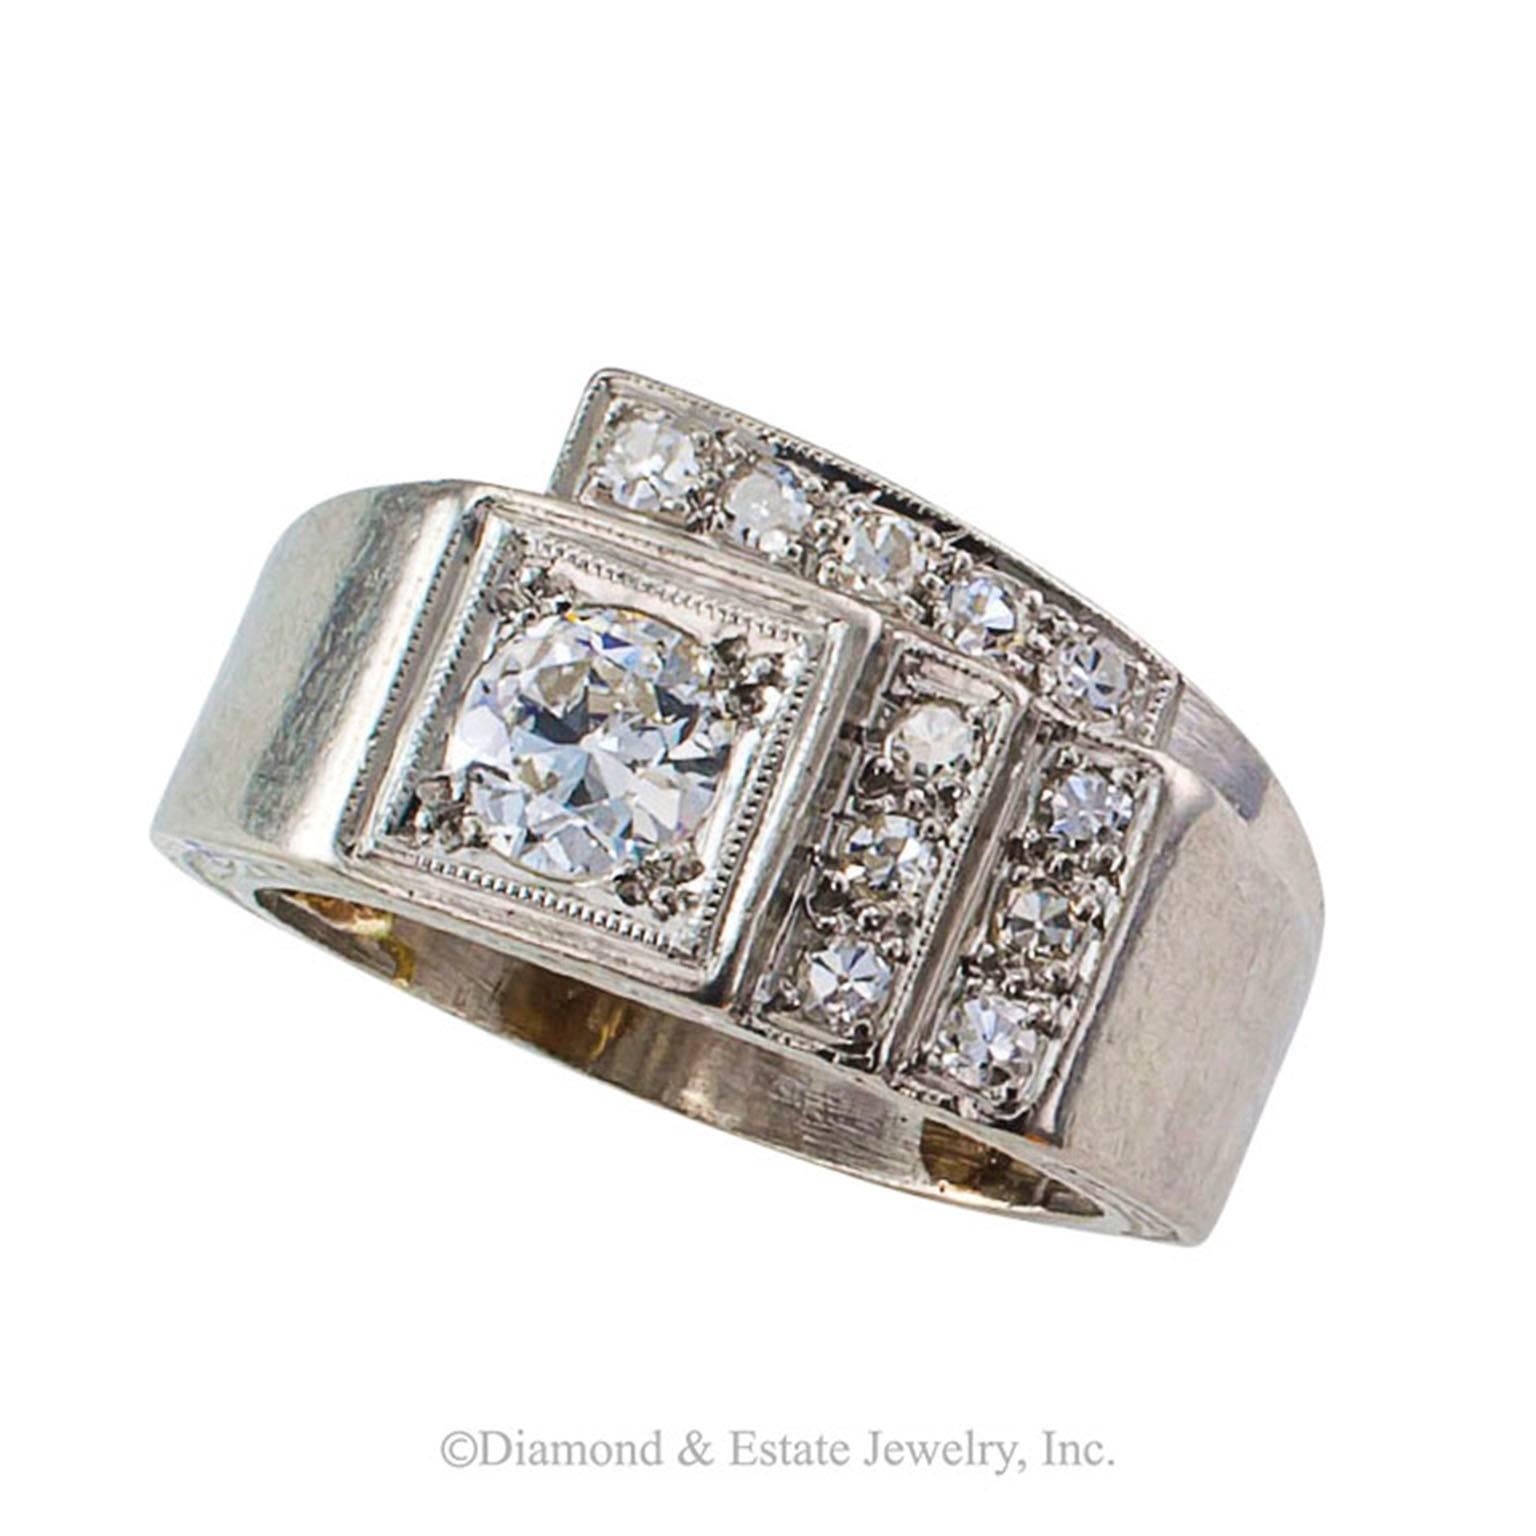 1930s Art Deco Diamond Platinum Geometric Ring

Art Deco to the max... handmade in platinum, the exquisite geometry stepped and set with eleven smaller diamonds totaling approximately 0.17 carat, playing off center to a larger old European-cut